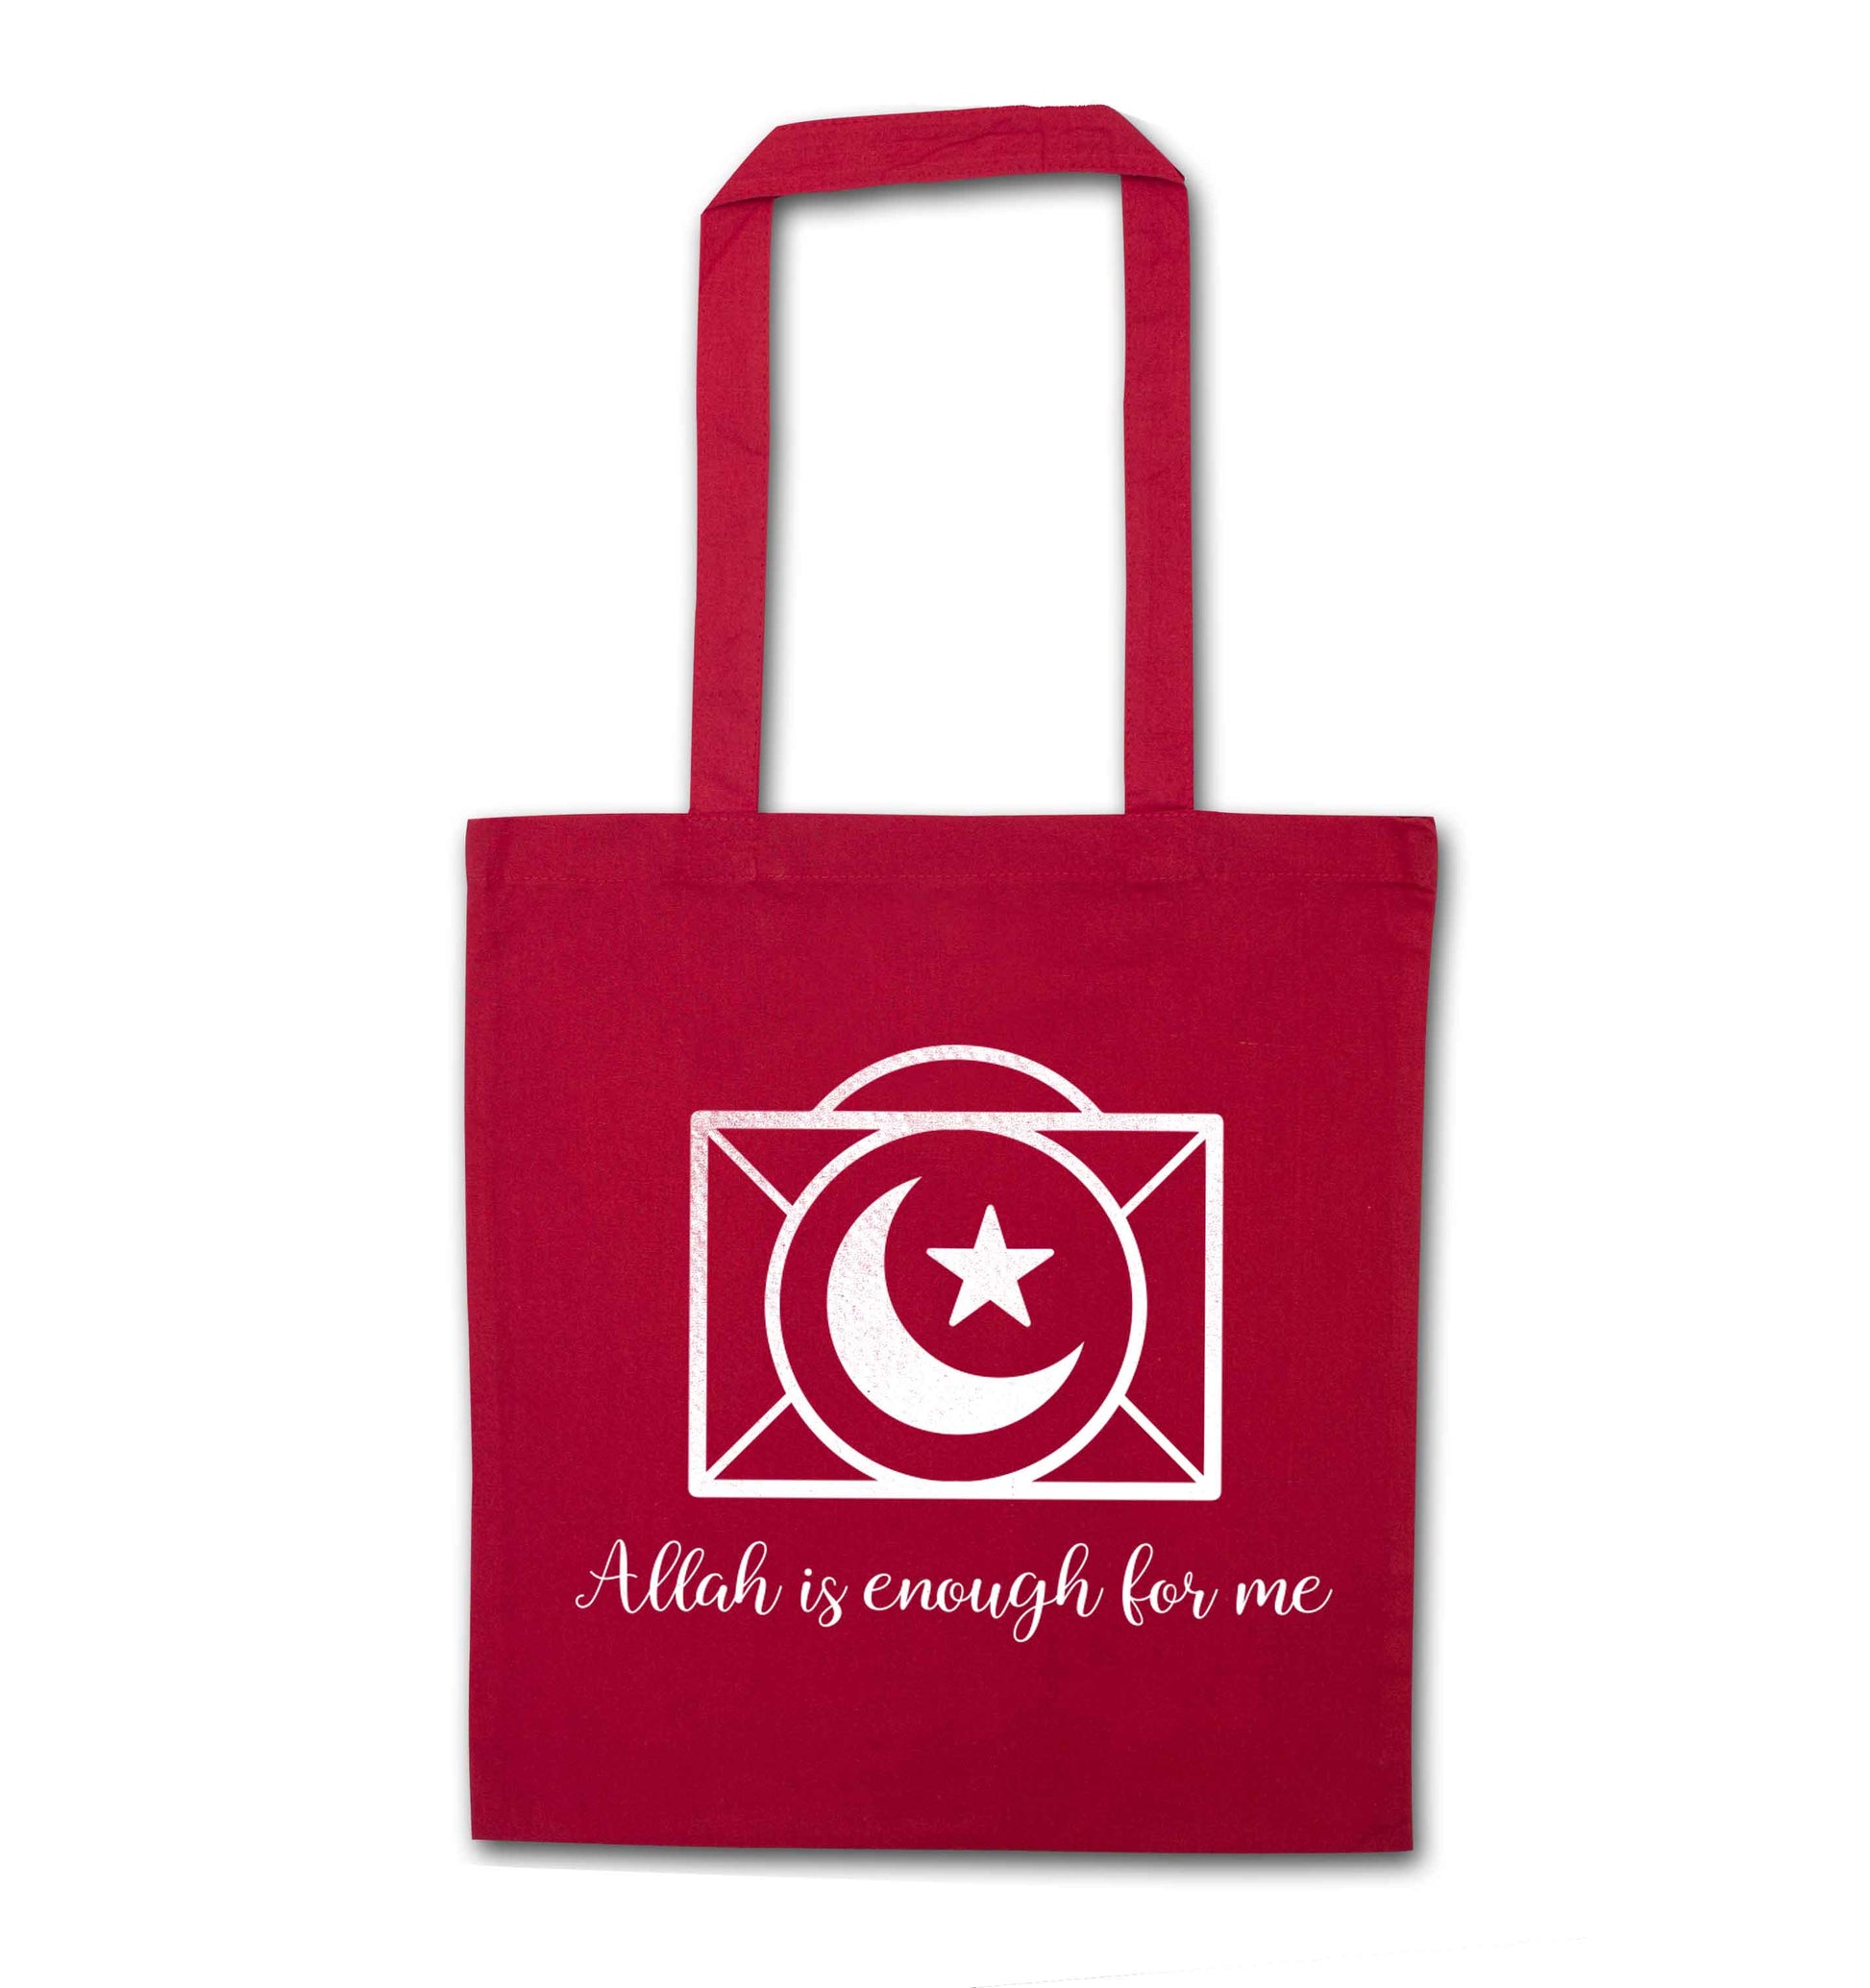 Allah is enough for me red tote bag